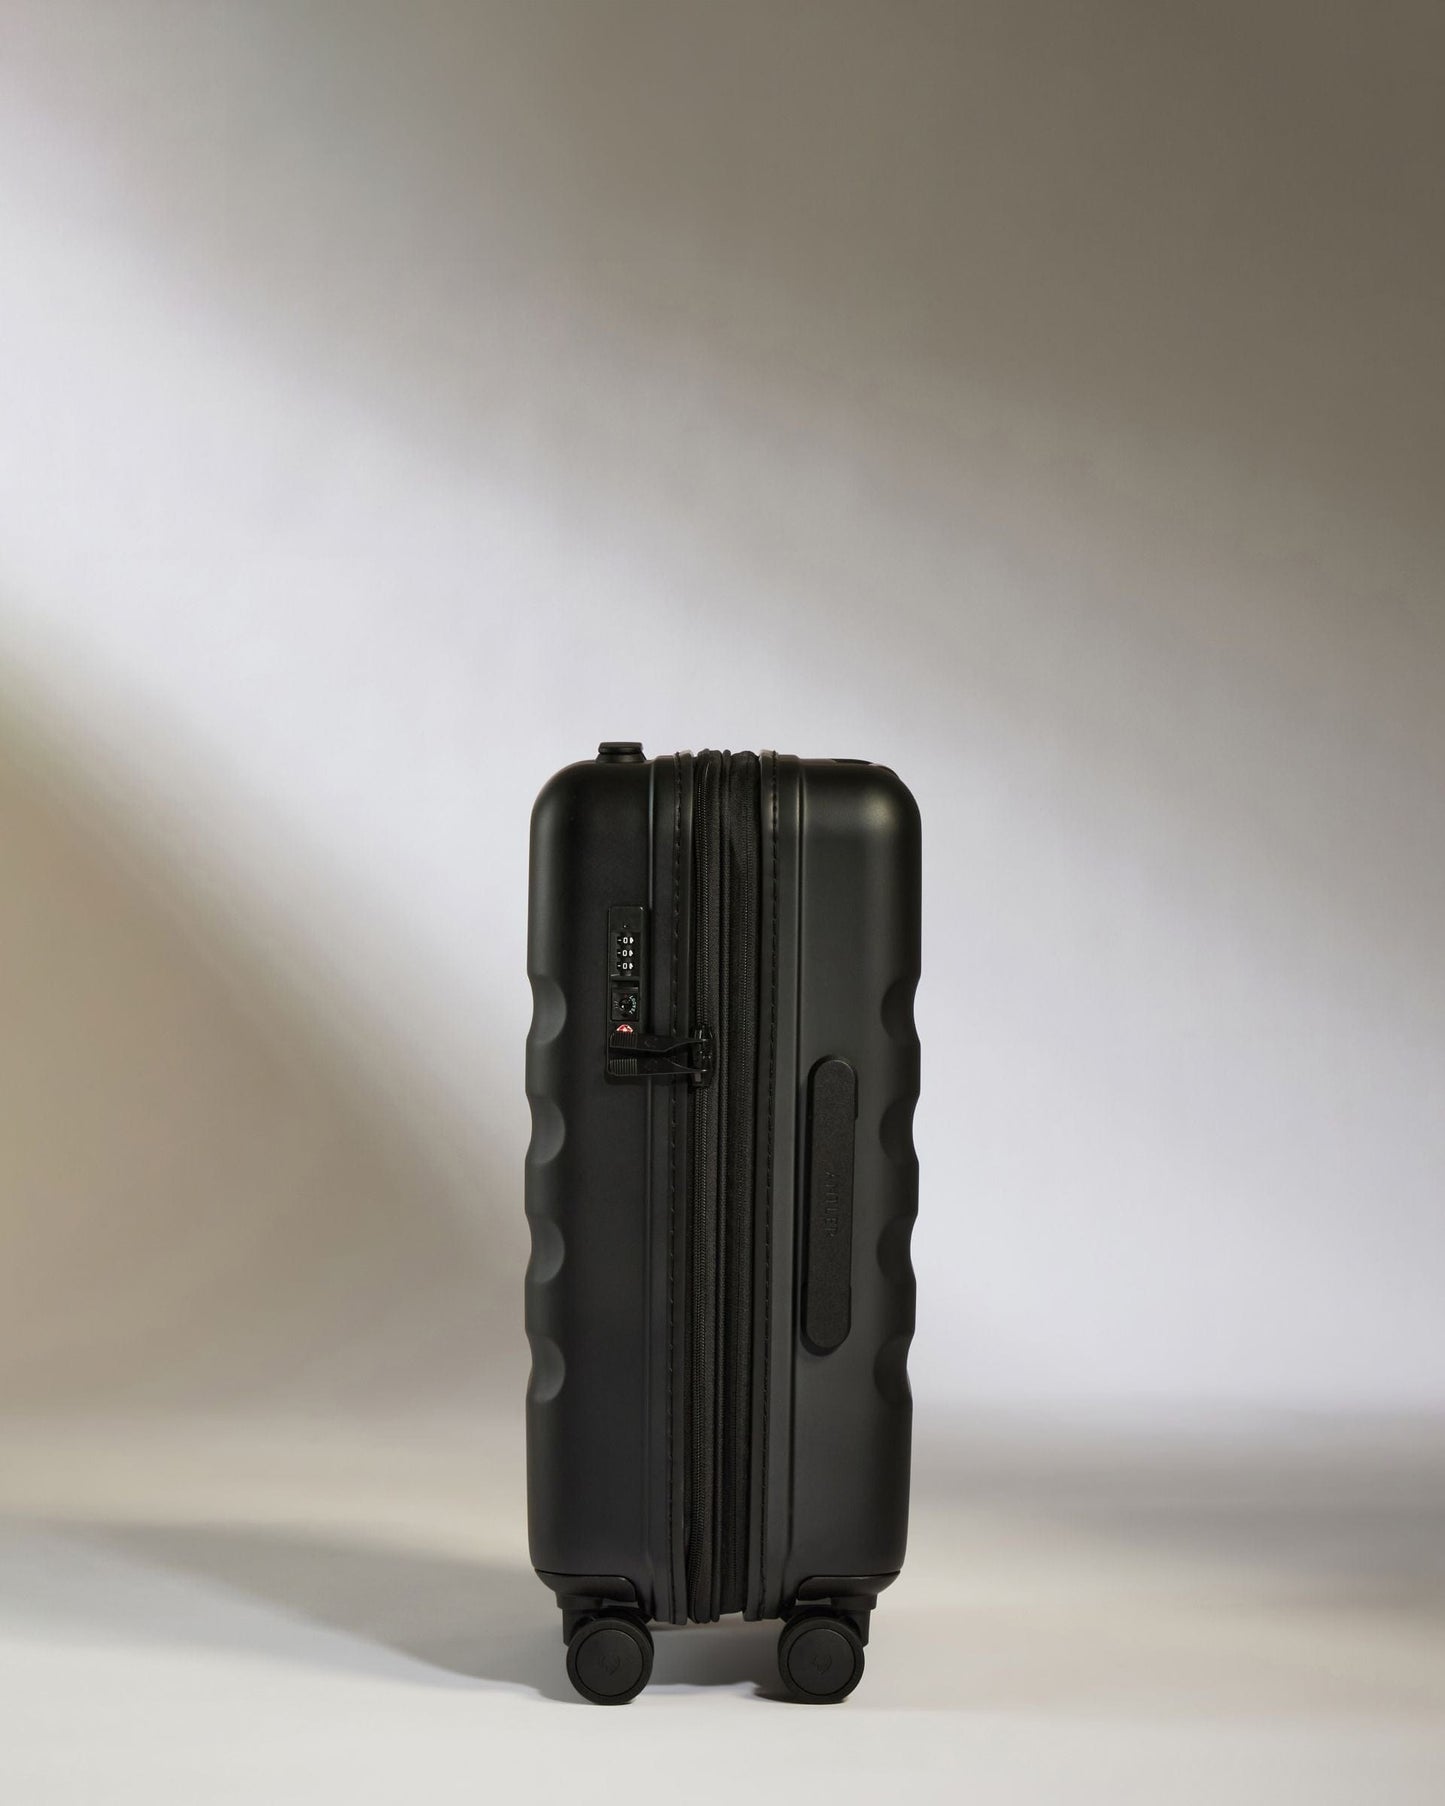 Antler Luggage -  Icon Stripe Cabin with Expander in Black - Hard Suitcase Icon Stripe Cabin with Expander in Black | Lightweight & Hard Shell Suitcase